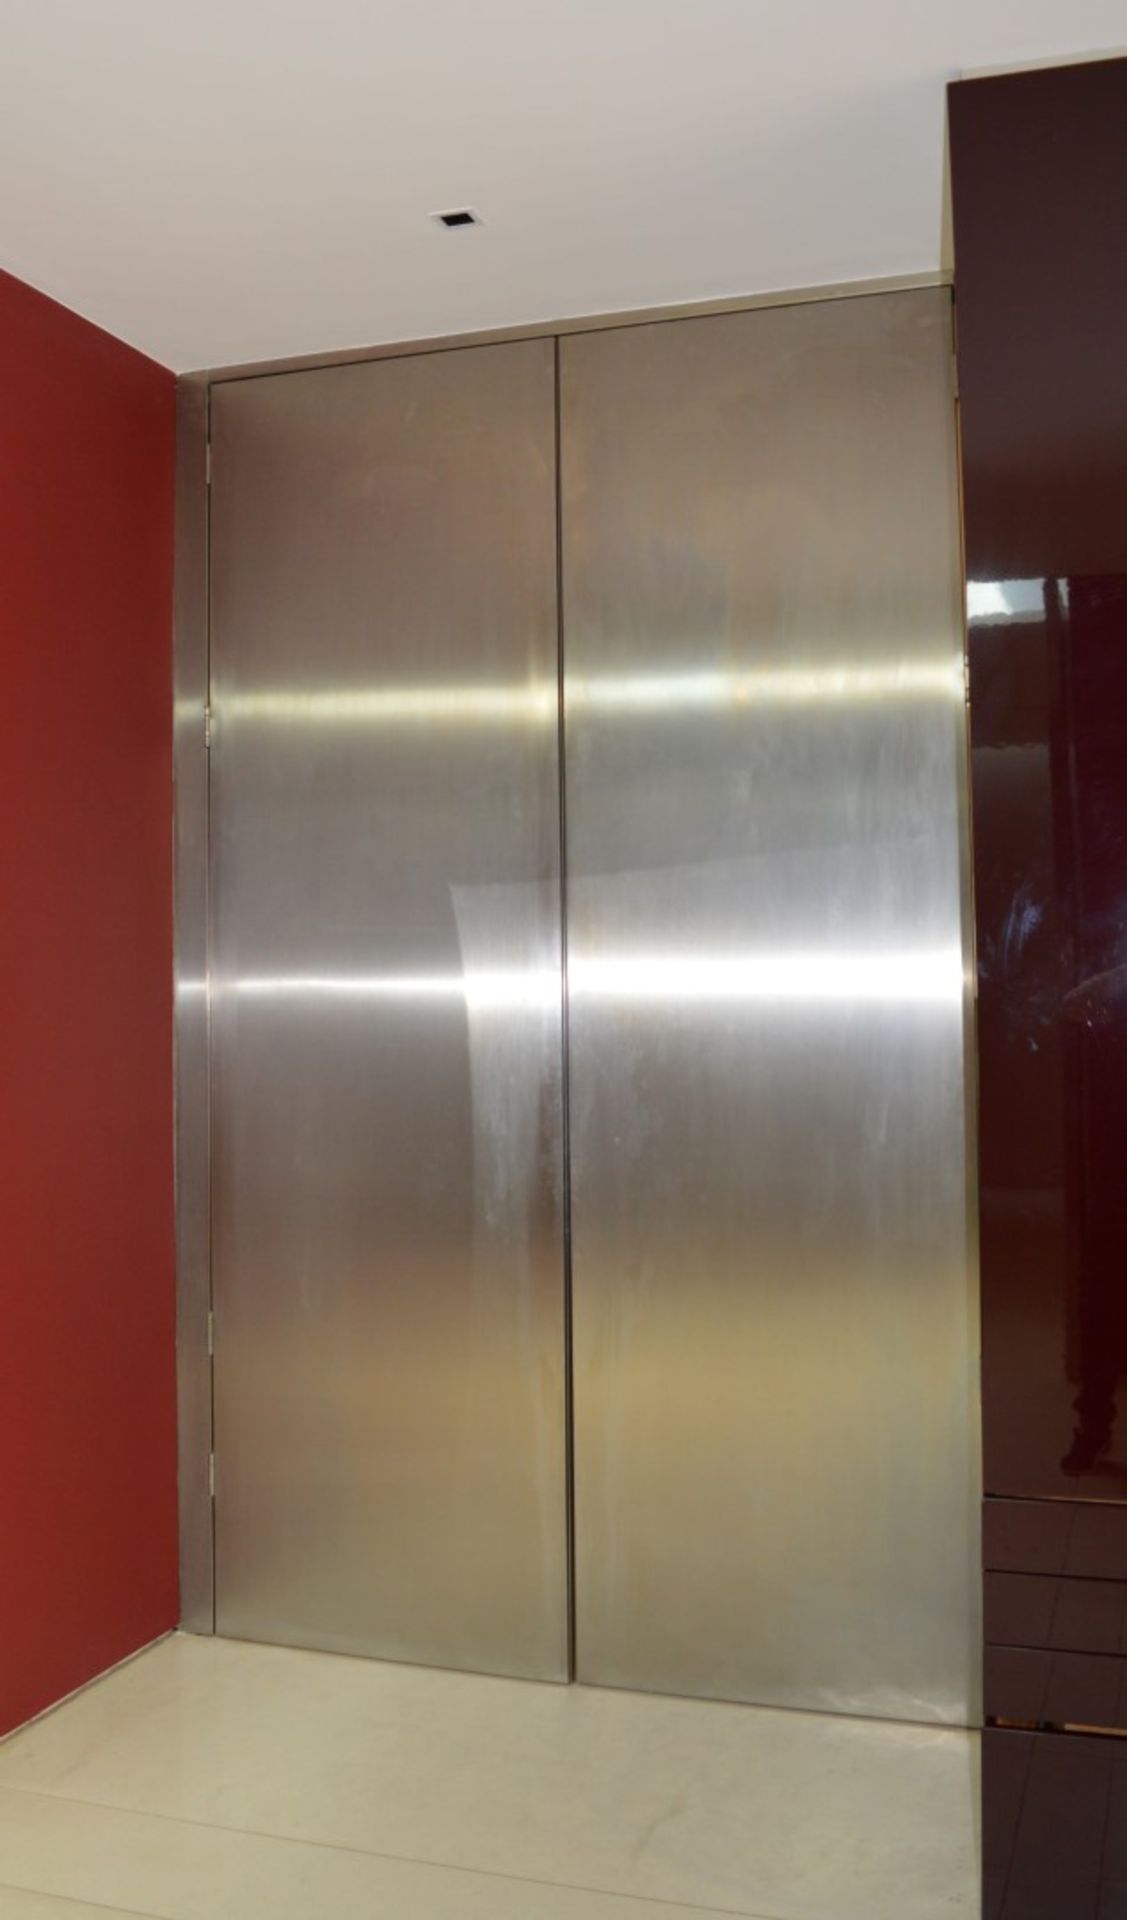 2 x Bespoke Internal Doors With Stainless Steel Finish - Pair of - Large Size - Ideal For Interior - Image 8 of 9